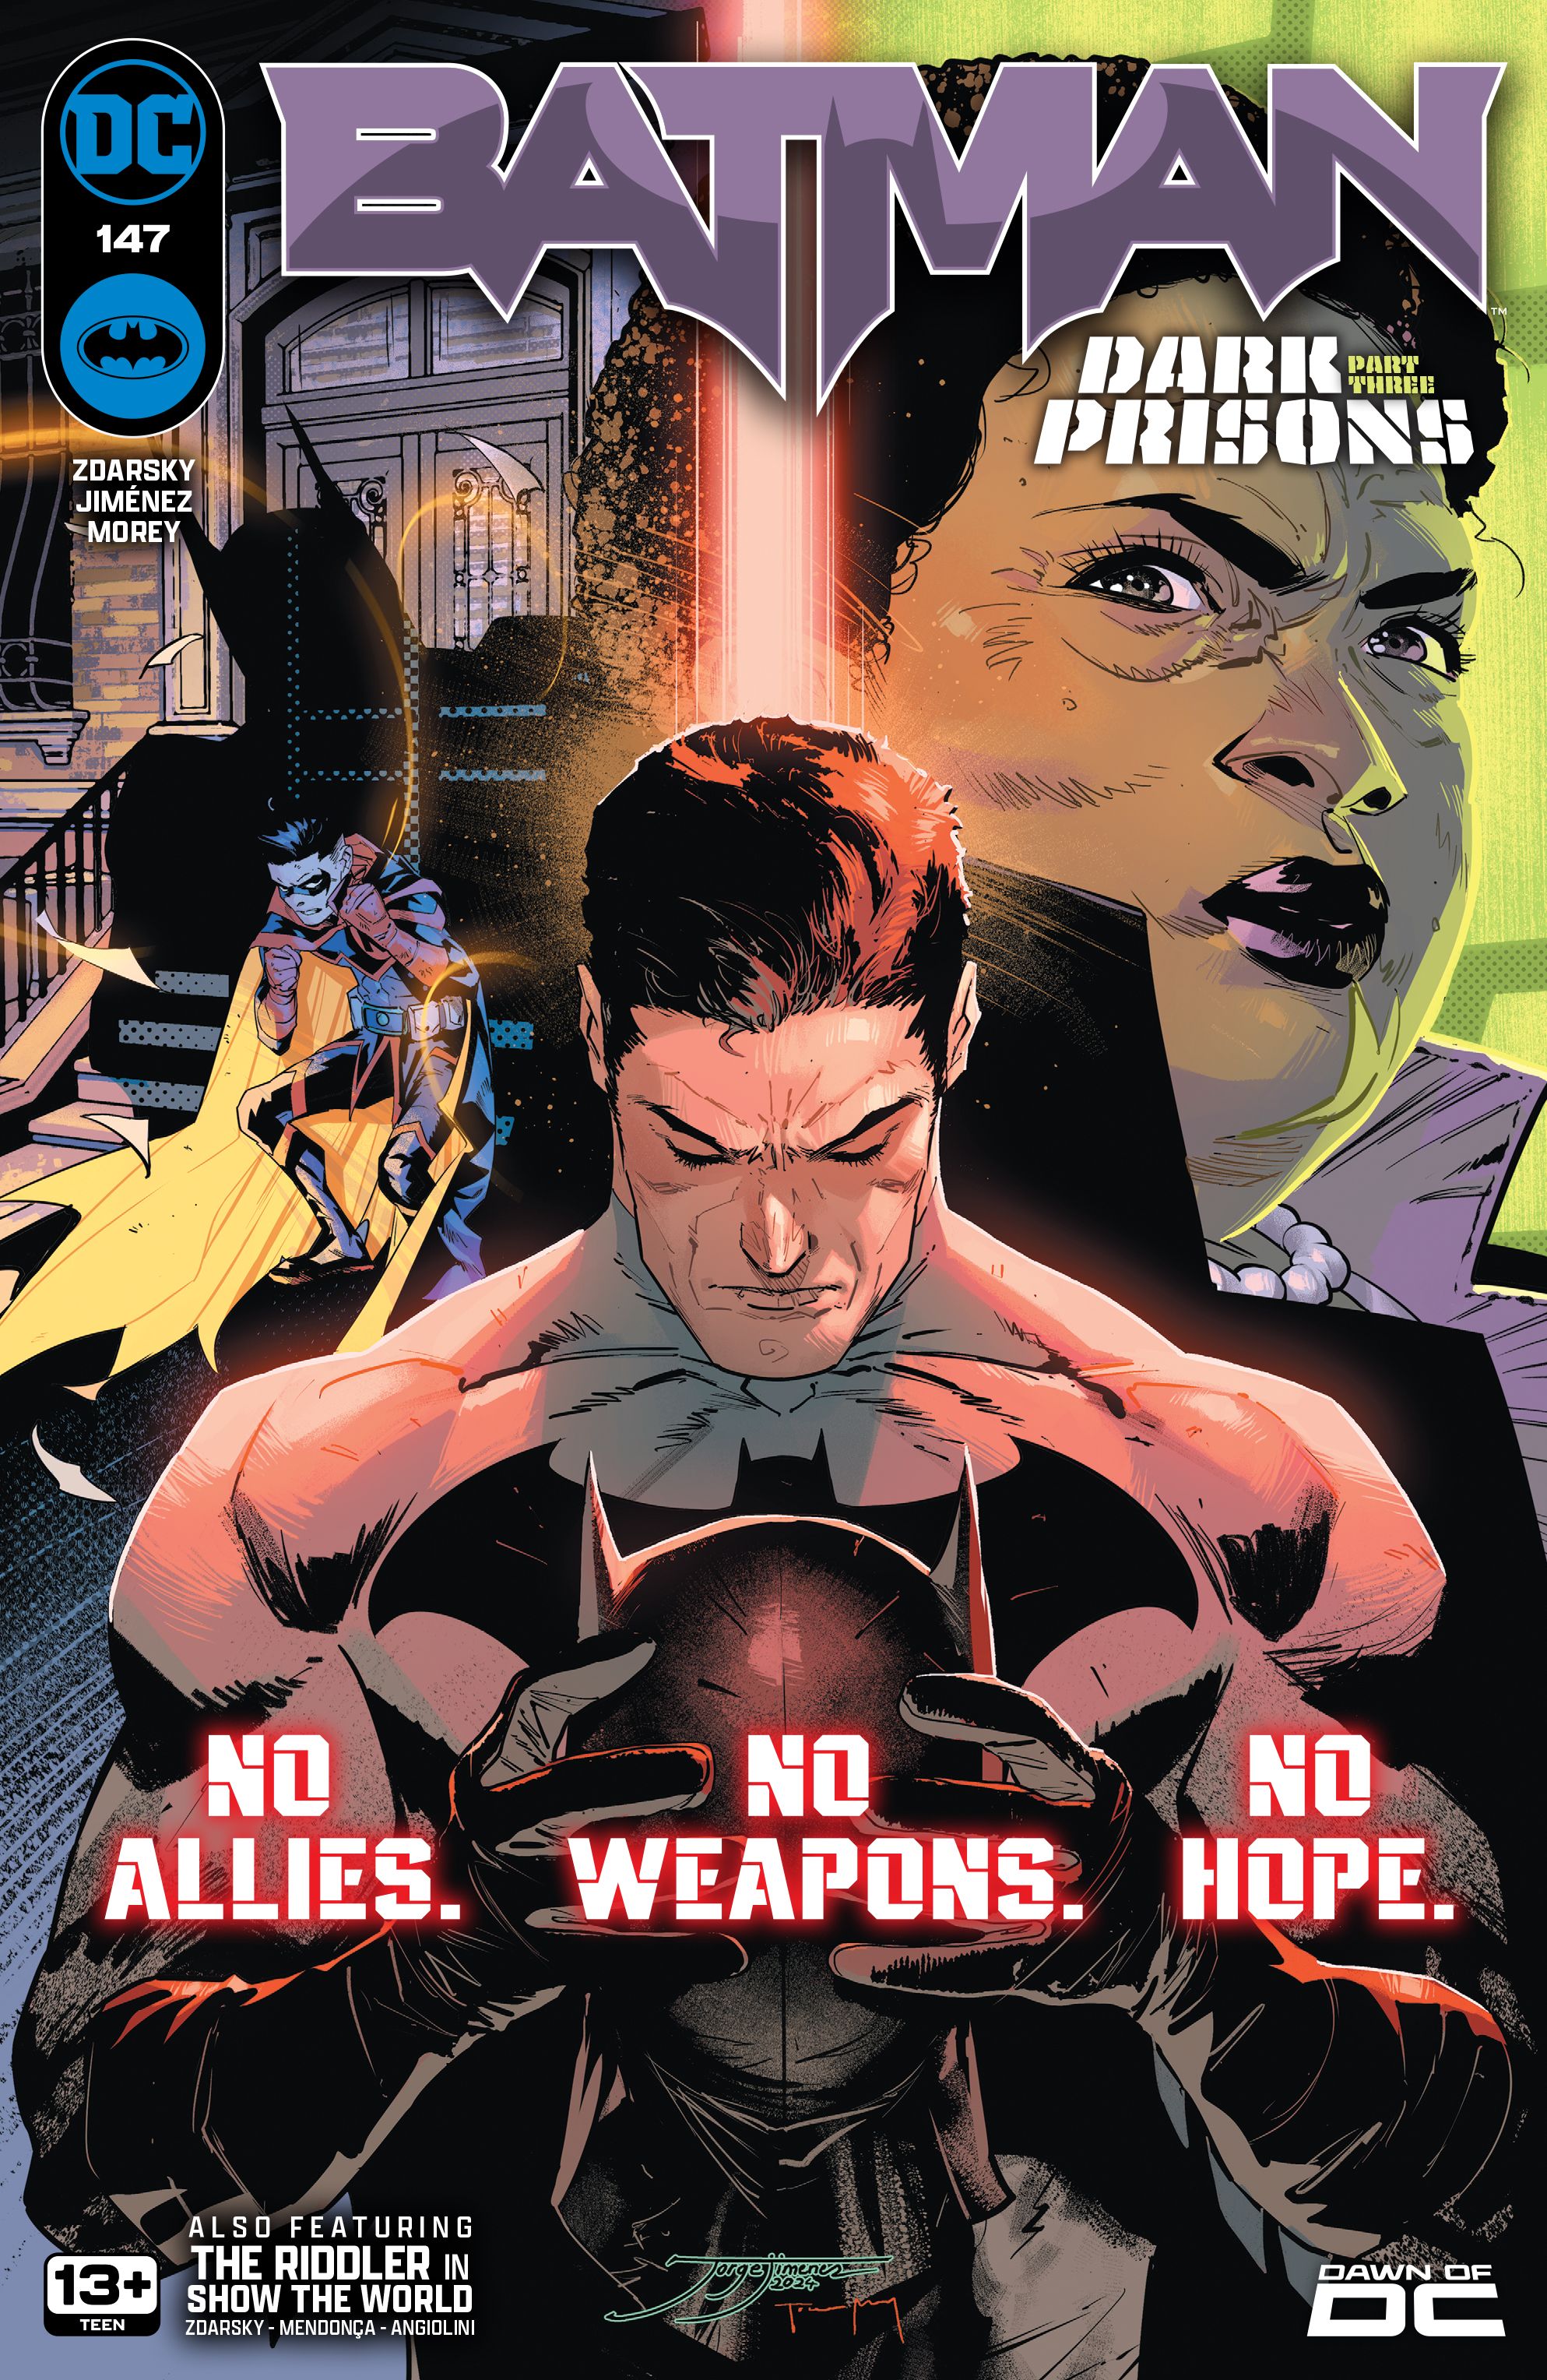 Batman #147 Main Cover: Bruce holds his Batman cowl in front of other images of Robin Damian Wayne and Amanda Waller.